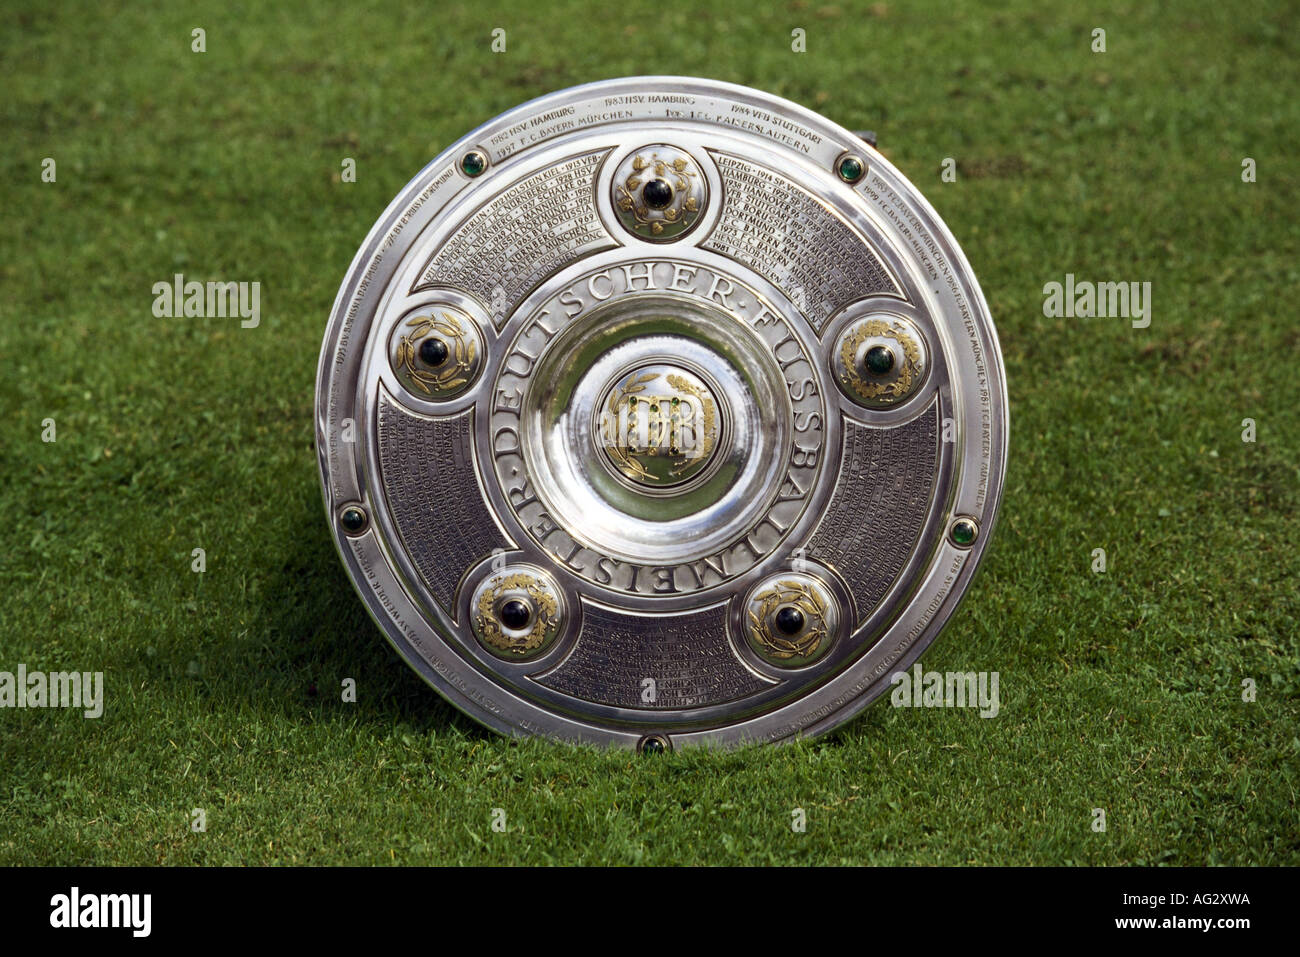 Sport / Sports, soccer, football, DFB Cup, German federation, trophy, confederation, historic, historical, Stock Photo